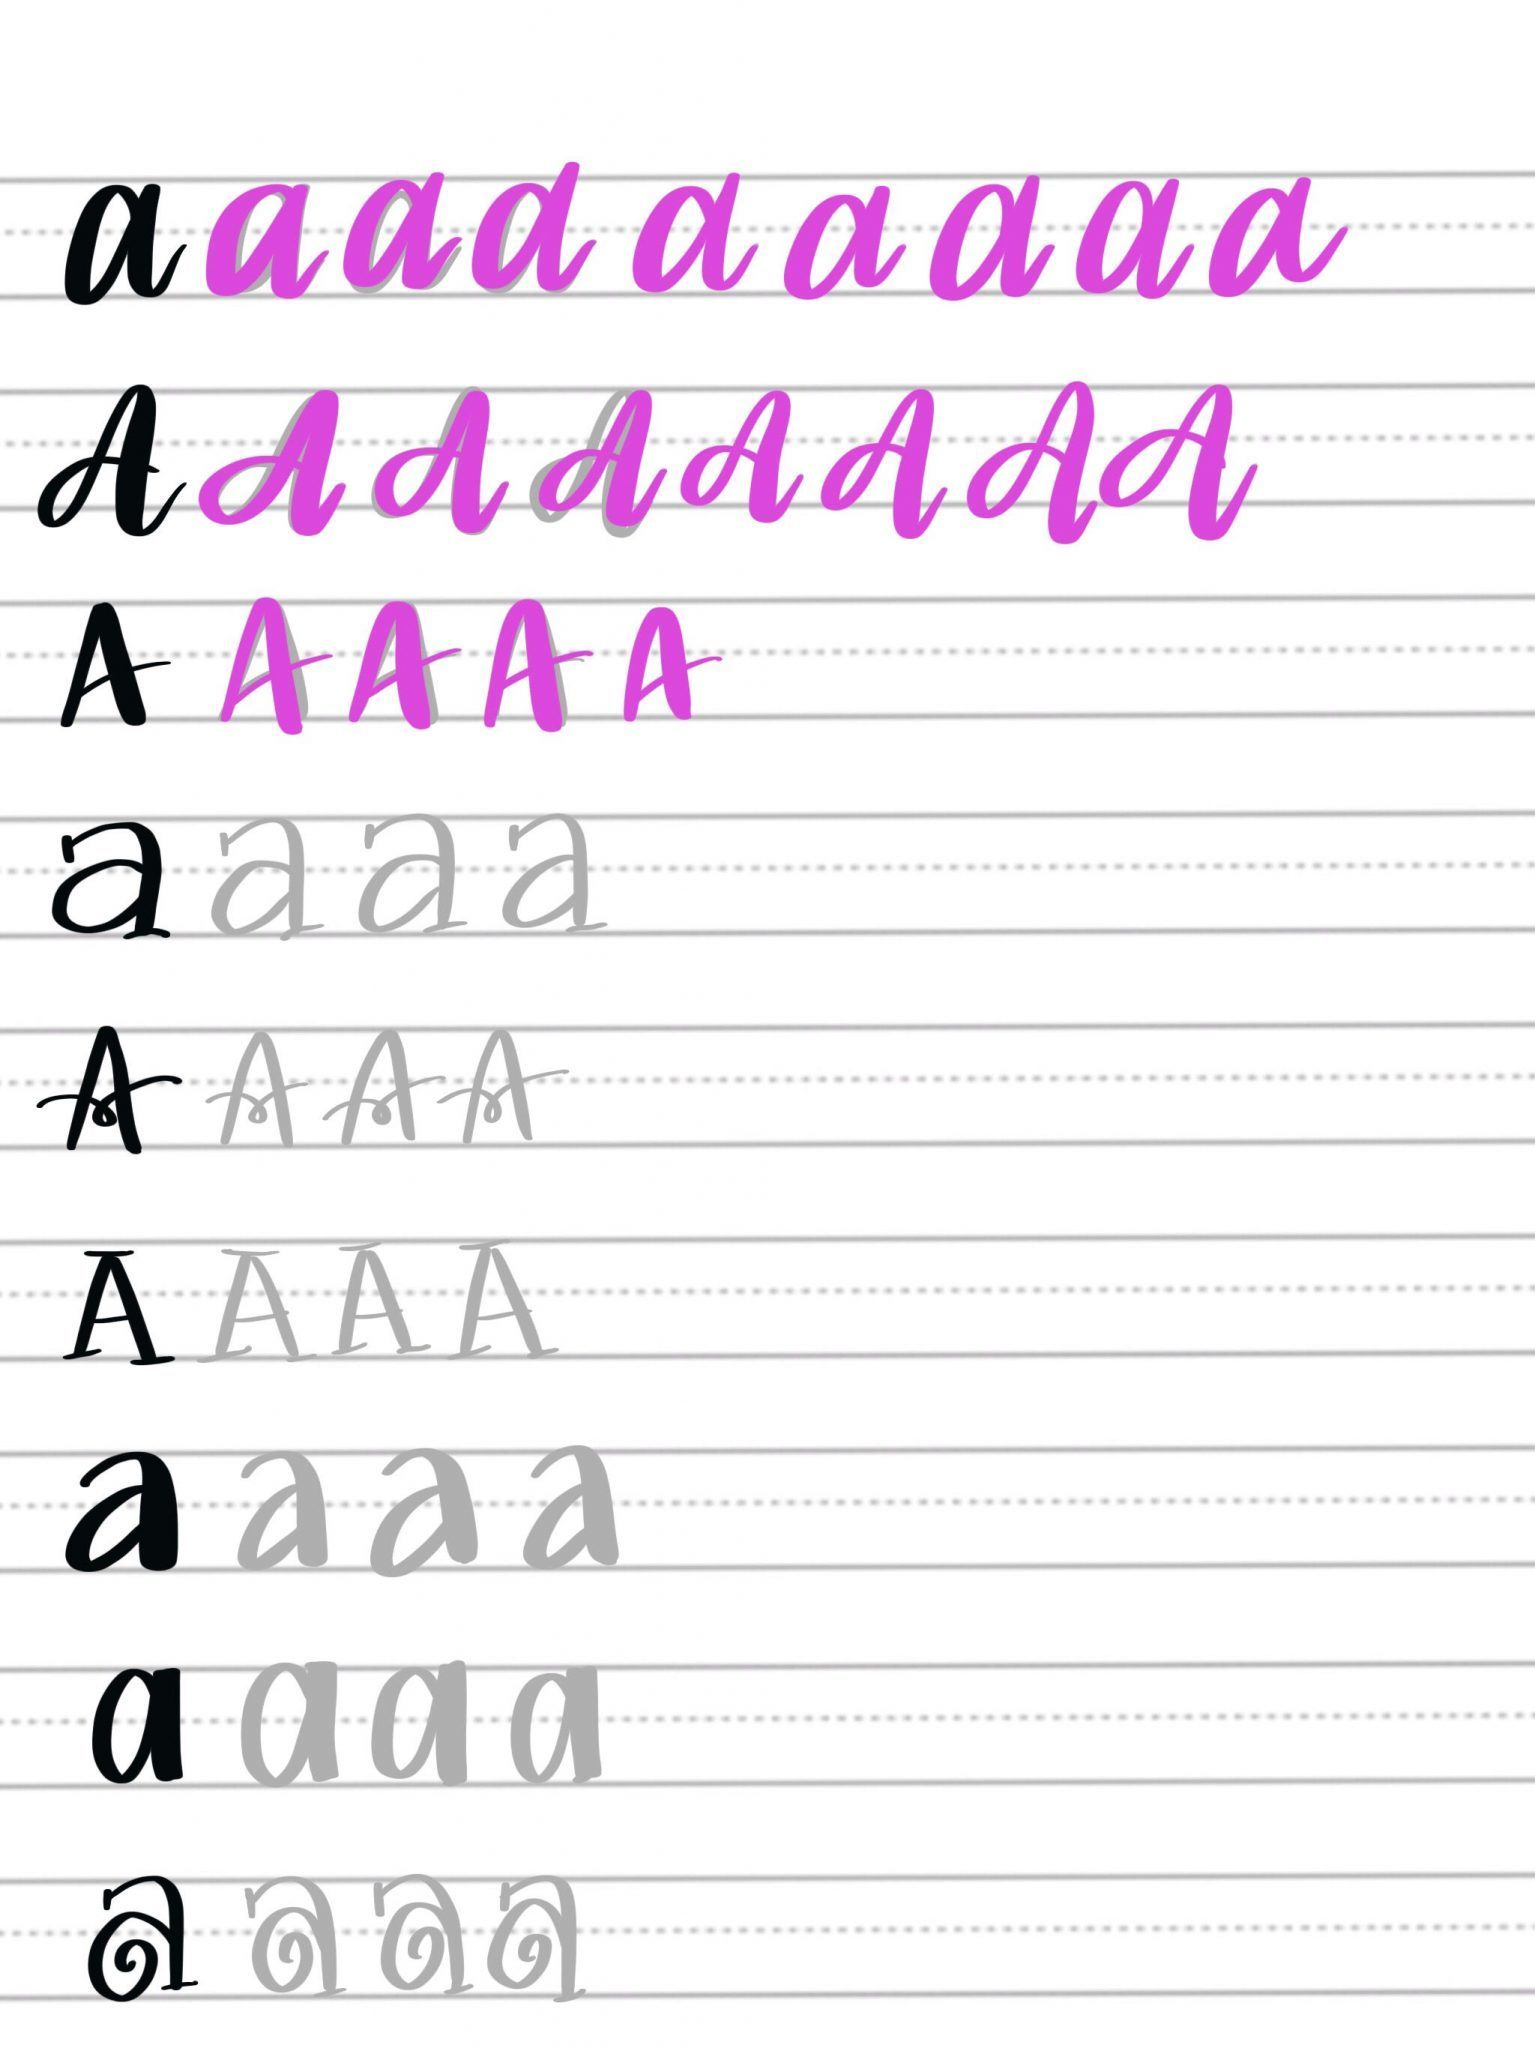 Learn How To Letter With These Free Hand Lettering Worksheets within Alphabet Worksheets Brush Lettering